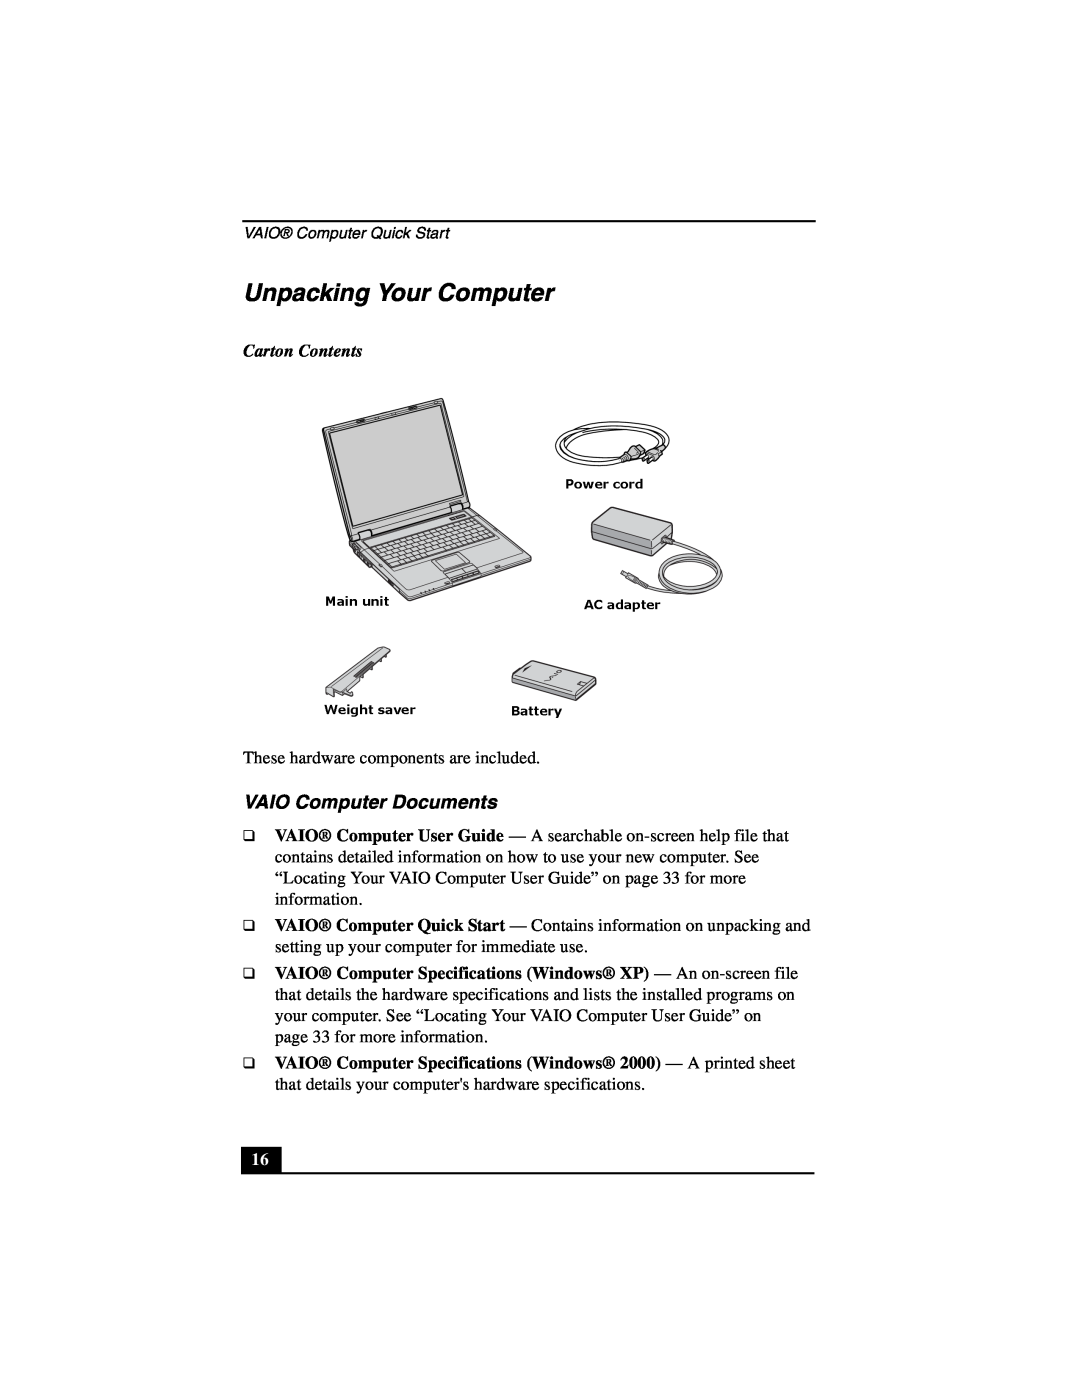 Sony PCG-GRT100 quick start Unpacking Your Computer, VAIO Computer Documents, Carton Contents 